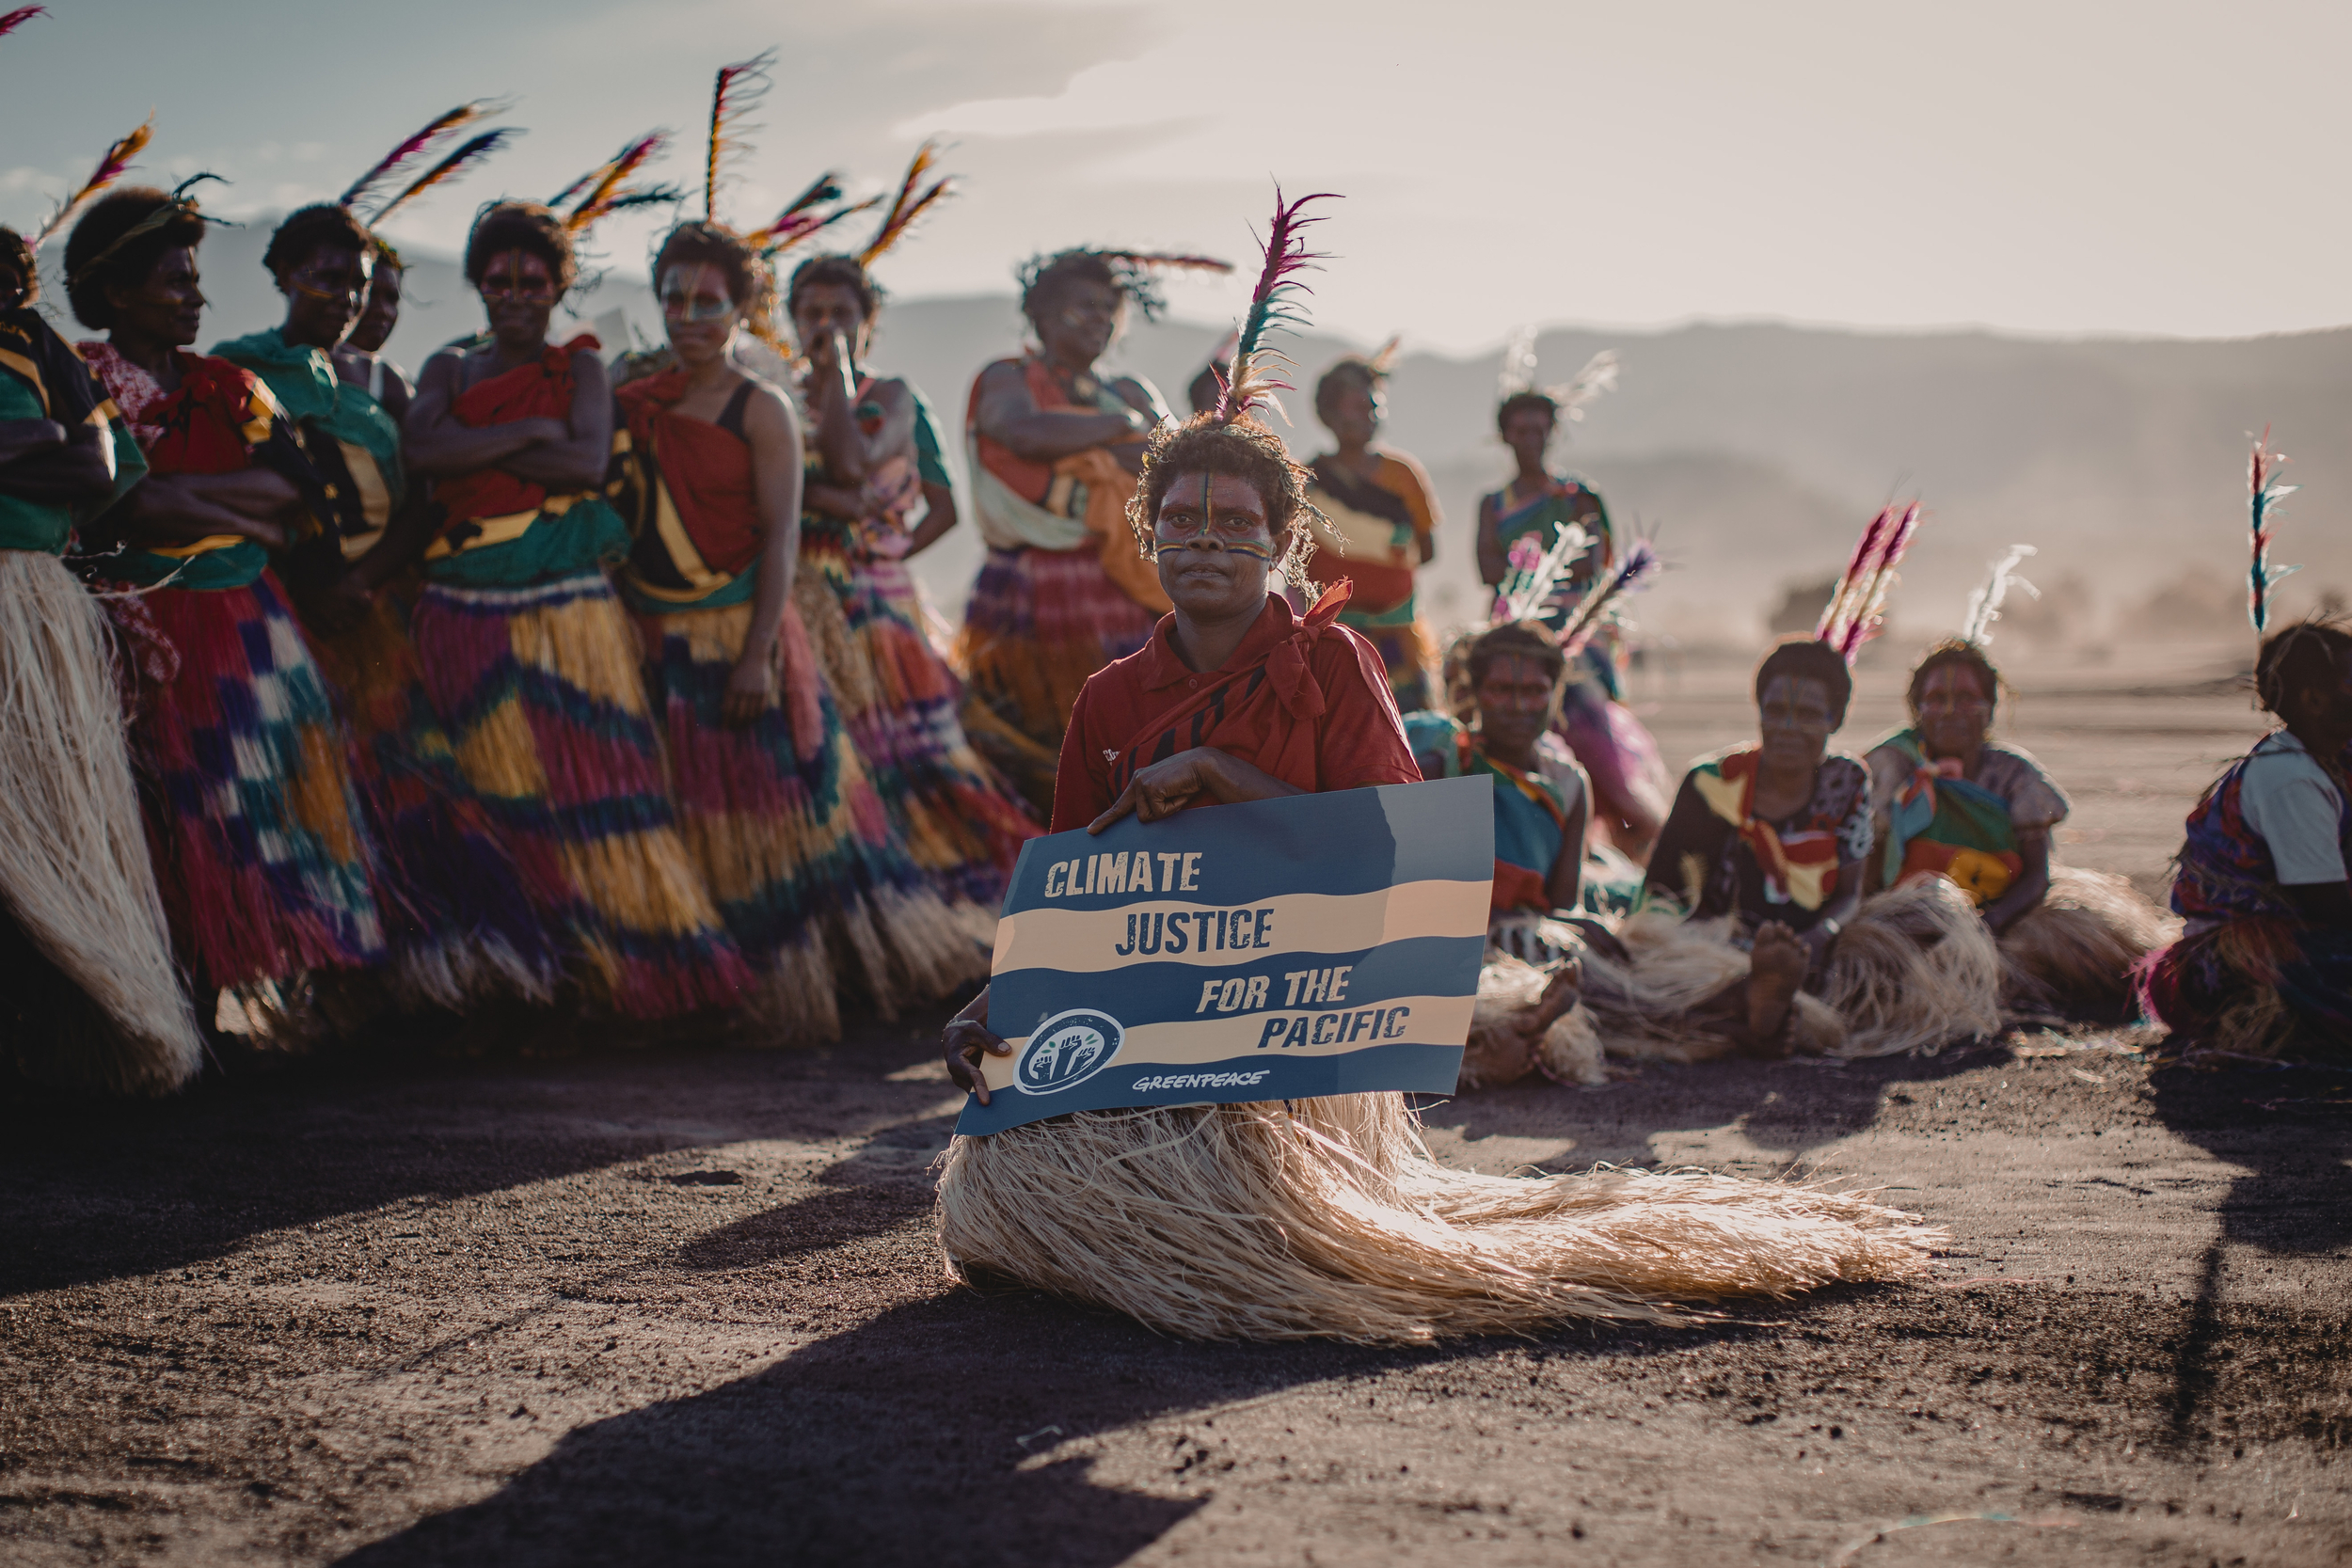 15-or-so brown-skinned women are gathered on a bright, windy beach or desert landscape. They wear colourful grass skirts, red, green and gold shawls, and decorative headdresses. At the front, one holds a Greenpeace branded sign reading 'Climate justice for the Pacific'.